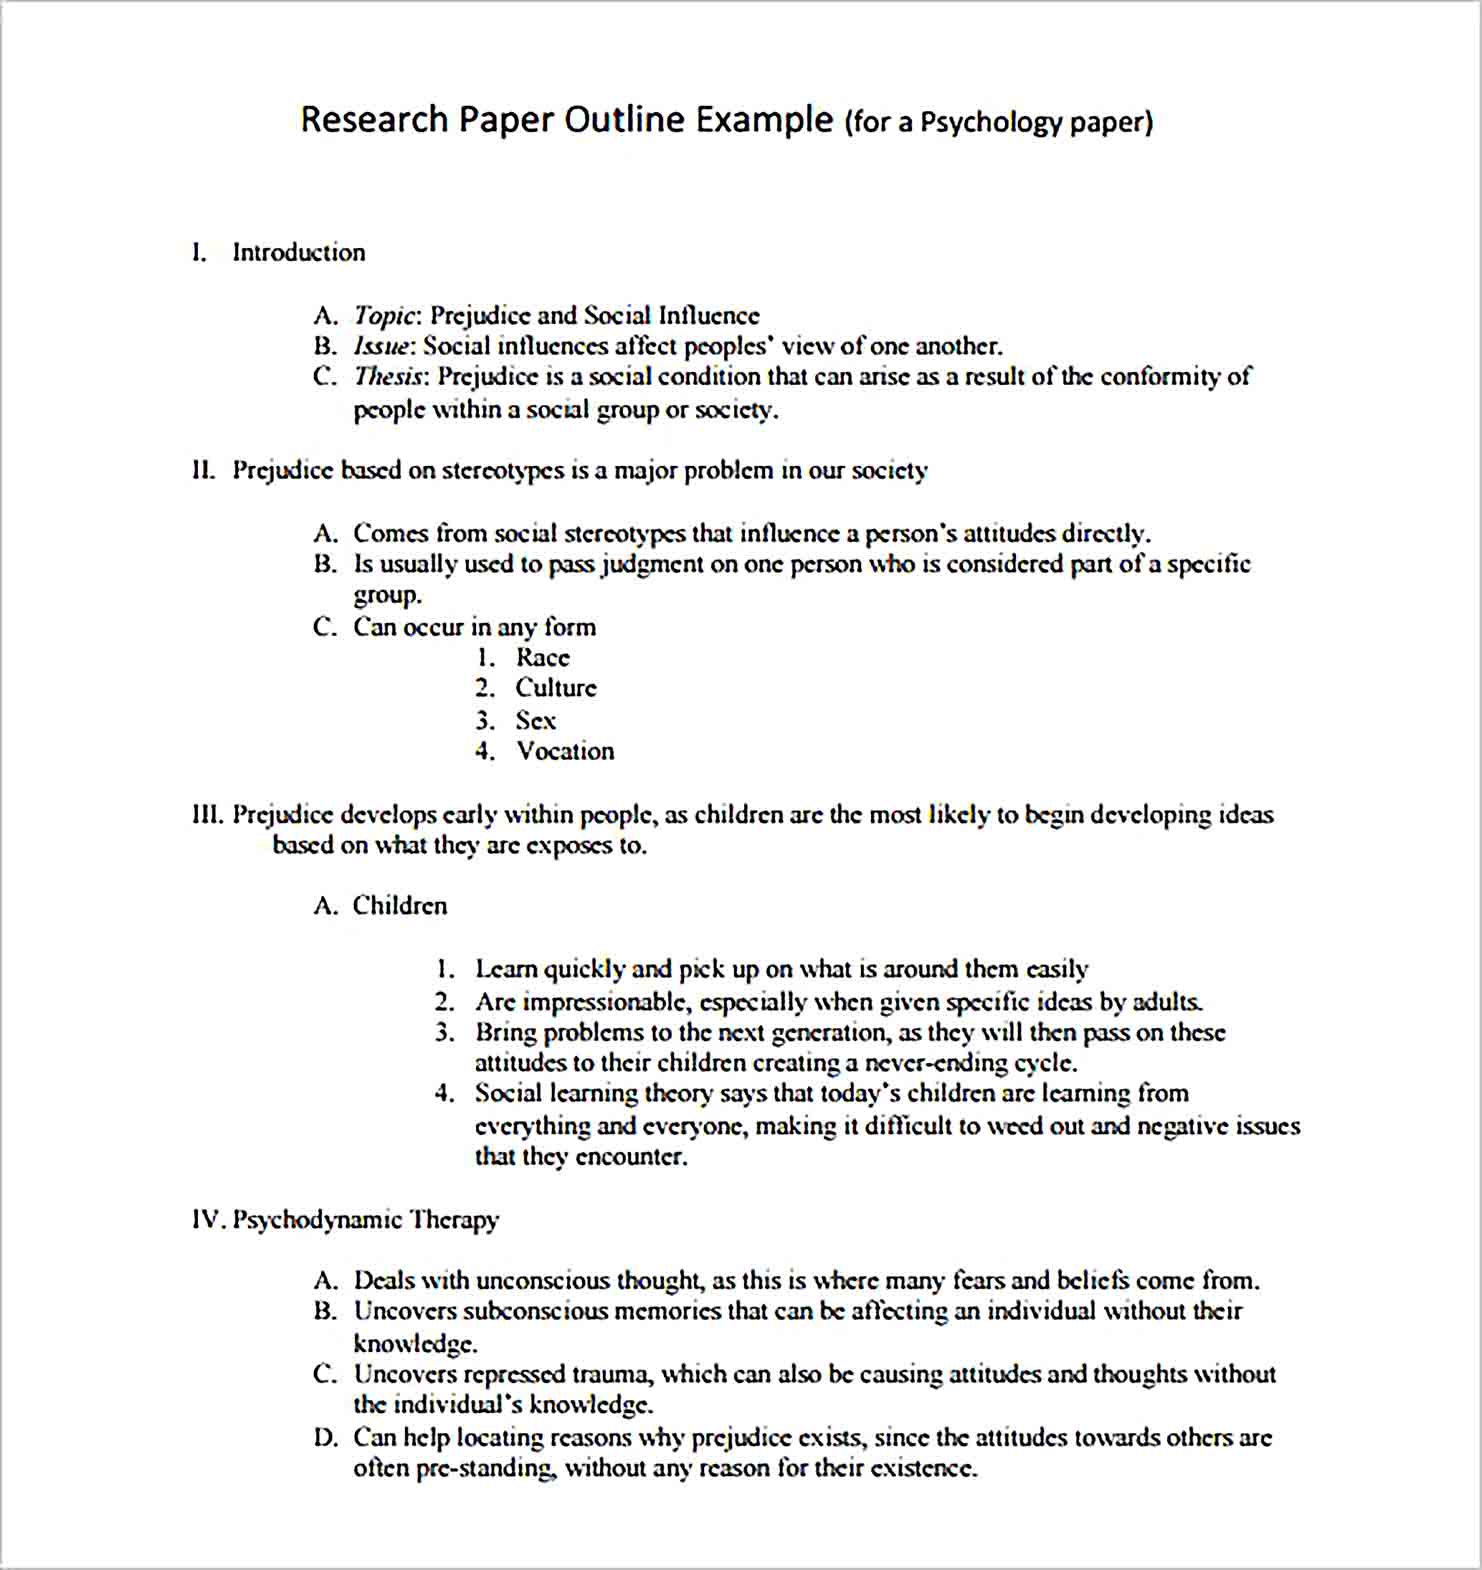 Research Paper Outline Template Sample | room surf.com